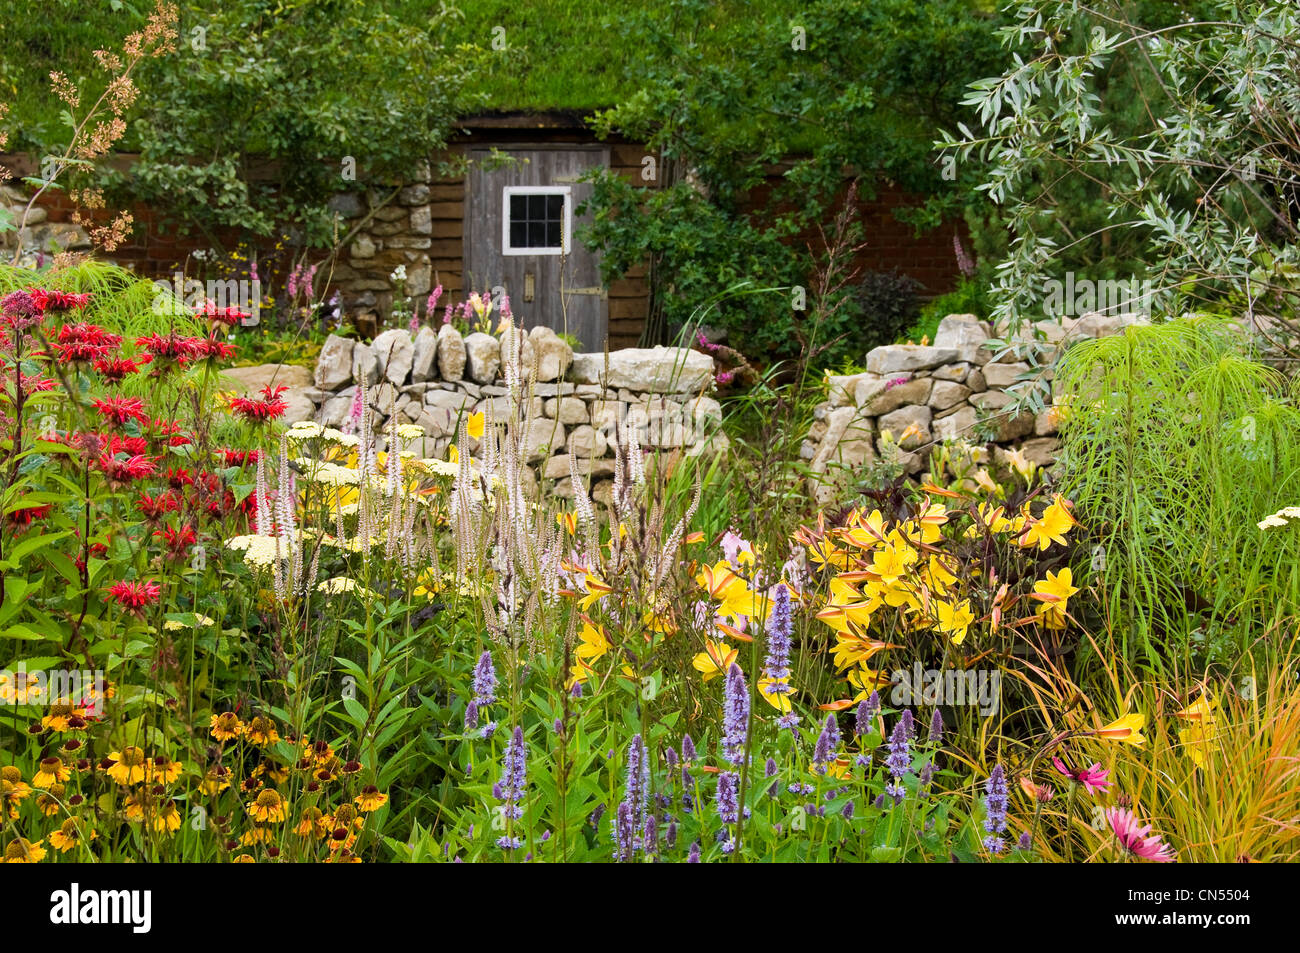 Horizontal view of a traditional wildlife-friendly country cottage garden with plants in bloom. Stock Photo